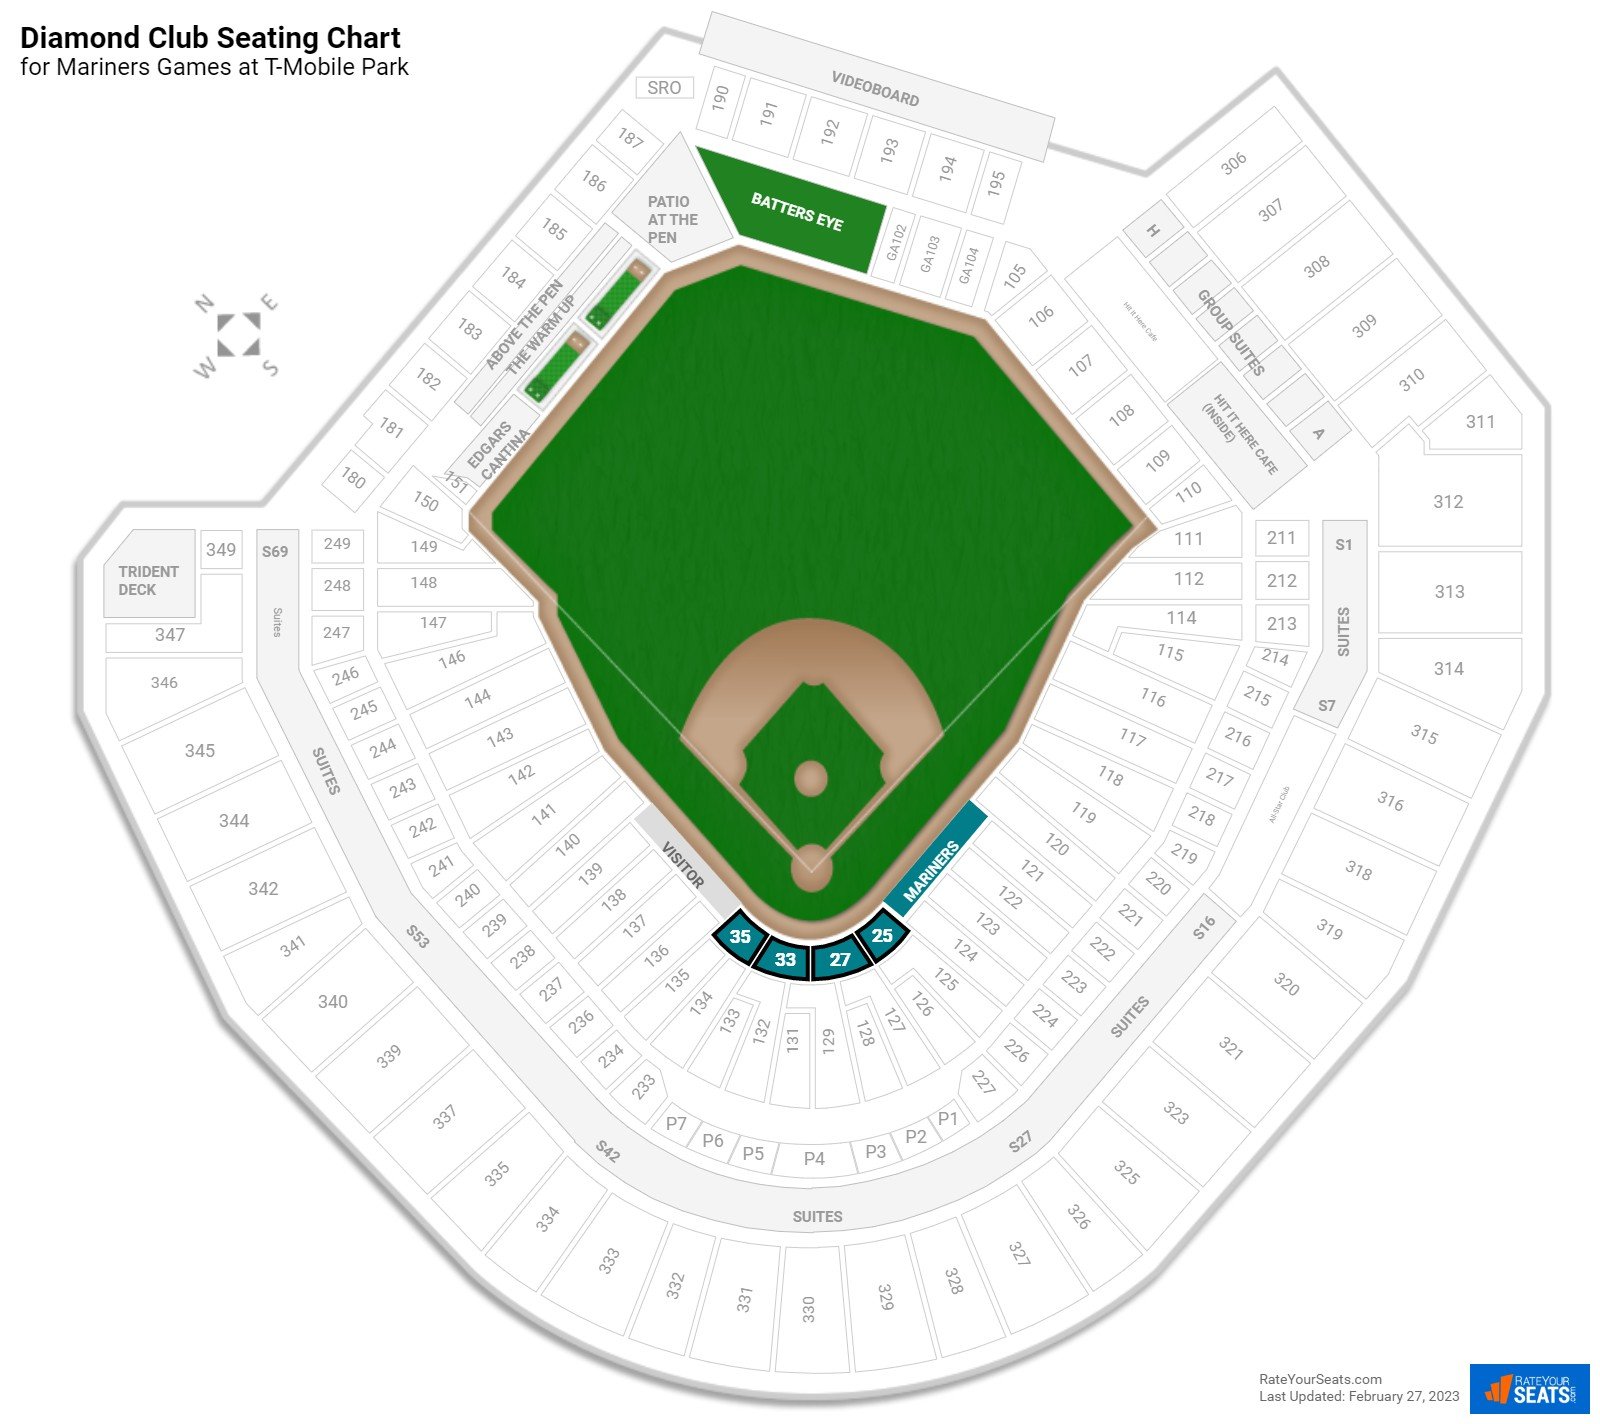 Mariners Diamond Club Seating Chart at T-Mobile Park